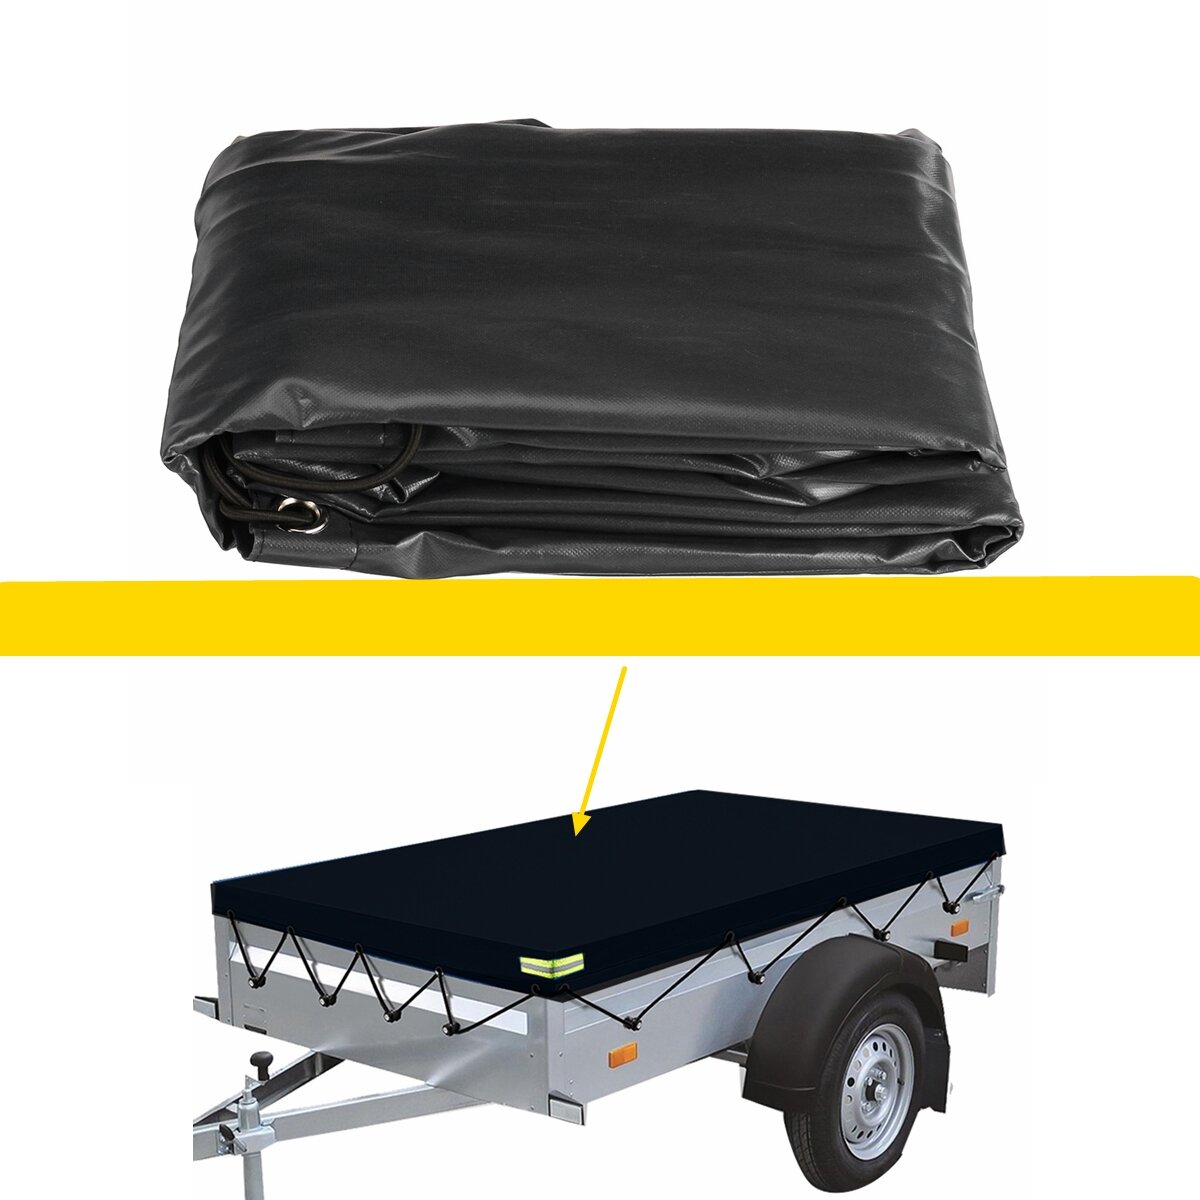 600D Trailer Cover Waterproof Windproof Dust Protector With Rubber Belt 155x95x13cm